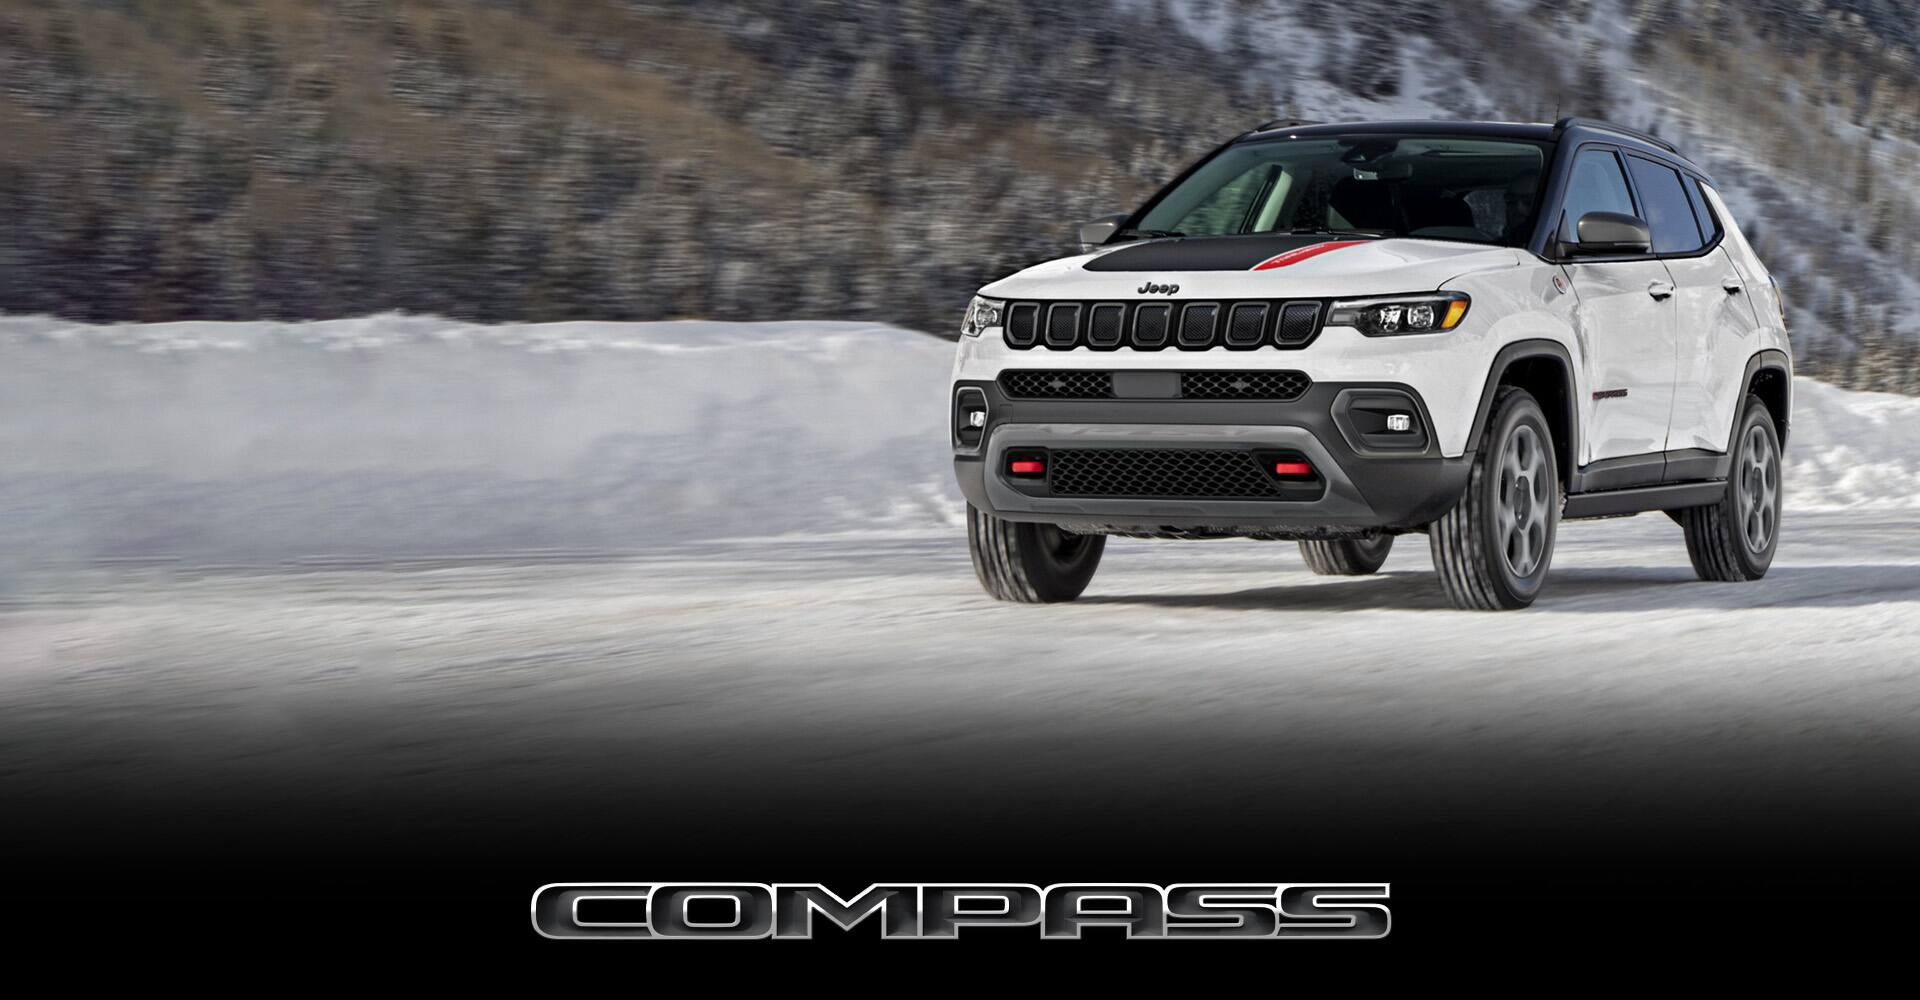 An angled profile of a 2022 Jeep Compass Trailhawk being driven on a snow-covered road beside a mountainous forest that is blurred to indicate the vehicle is in motion. Compass.